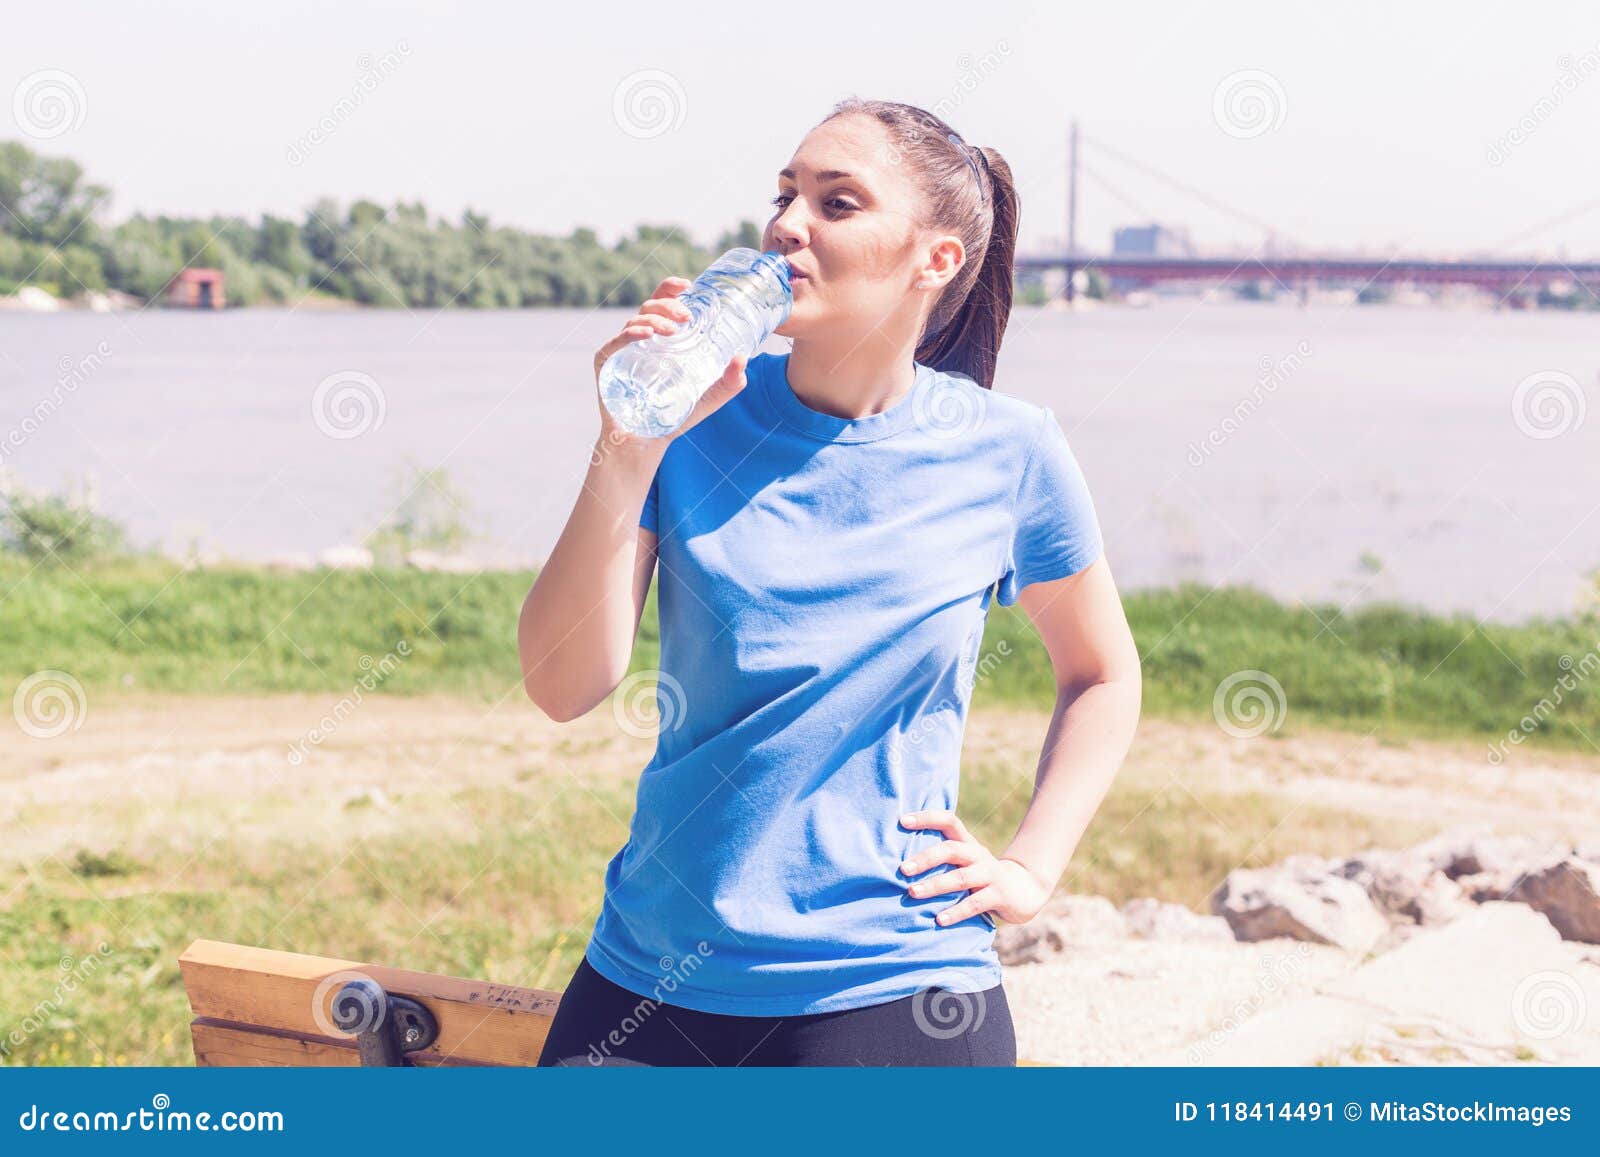 Fitness girl refreshing stock image. Image of outdoor - 118414491